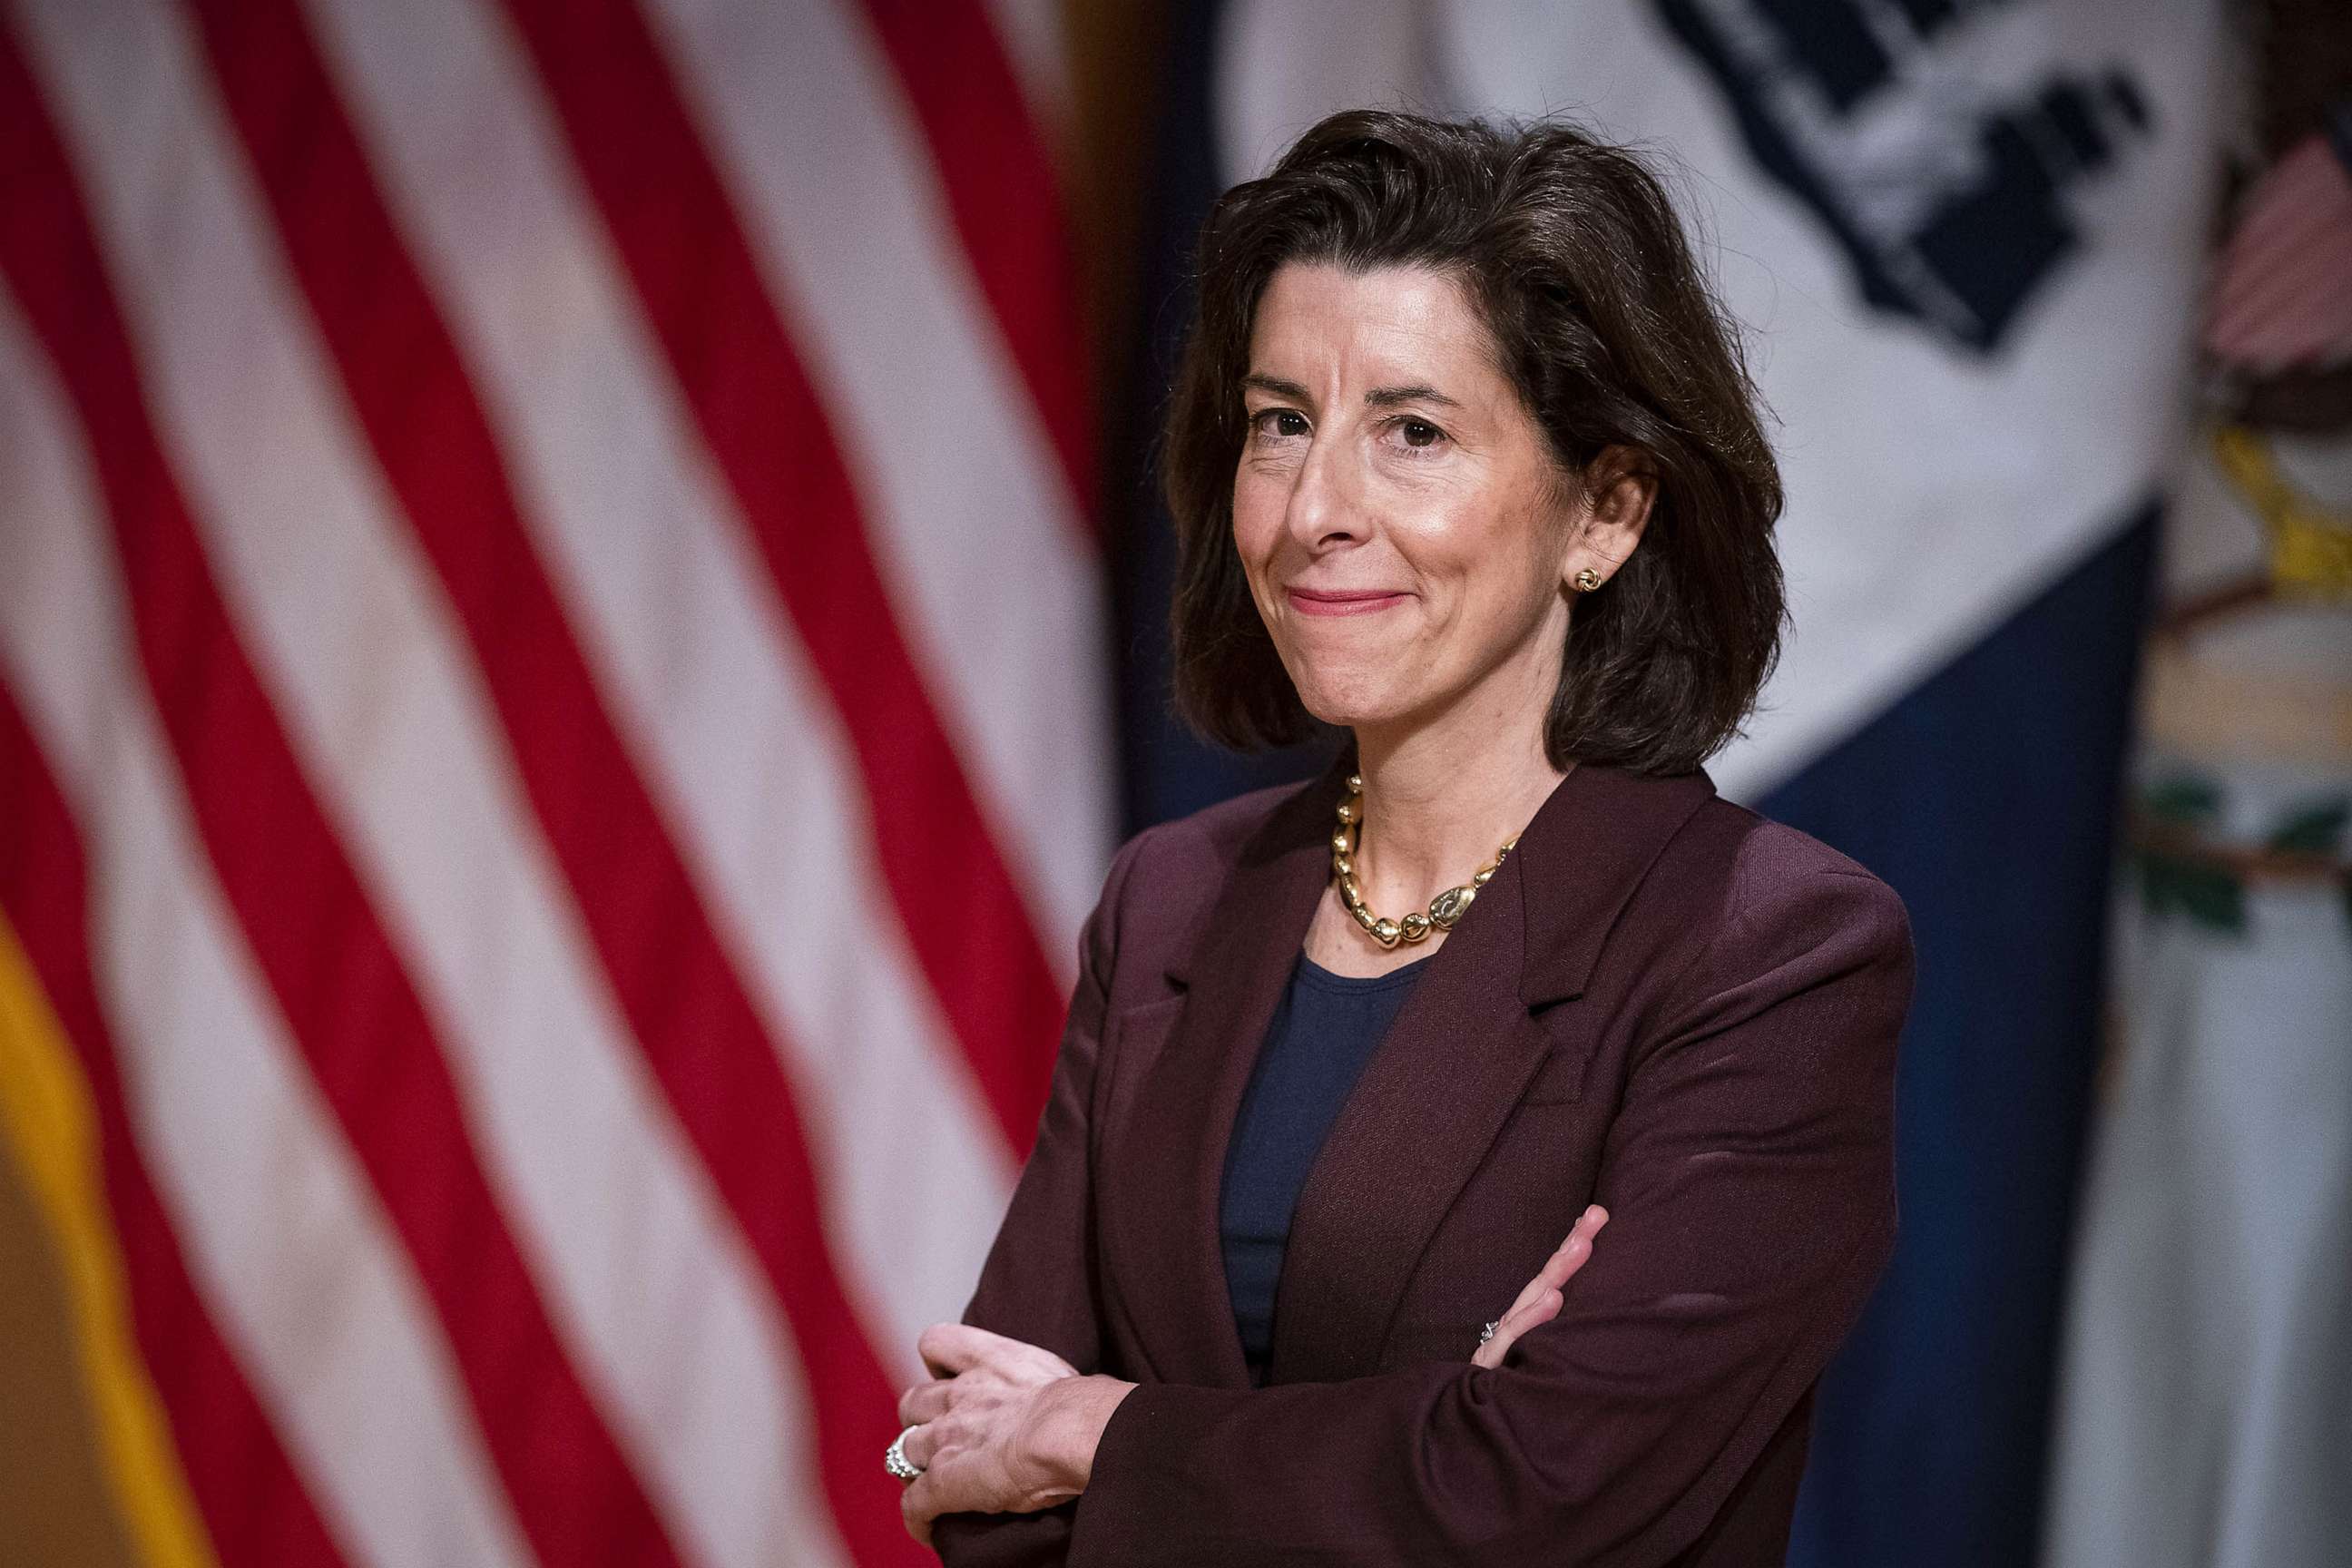 PHOTO: Gina Raimondo, US secretary of commerce, during an event at Georgetown University's School of Foreign Service in Washington, DC, Feb. 23, 2023.